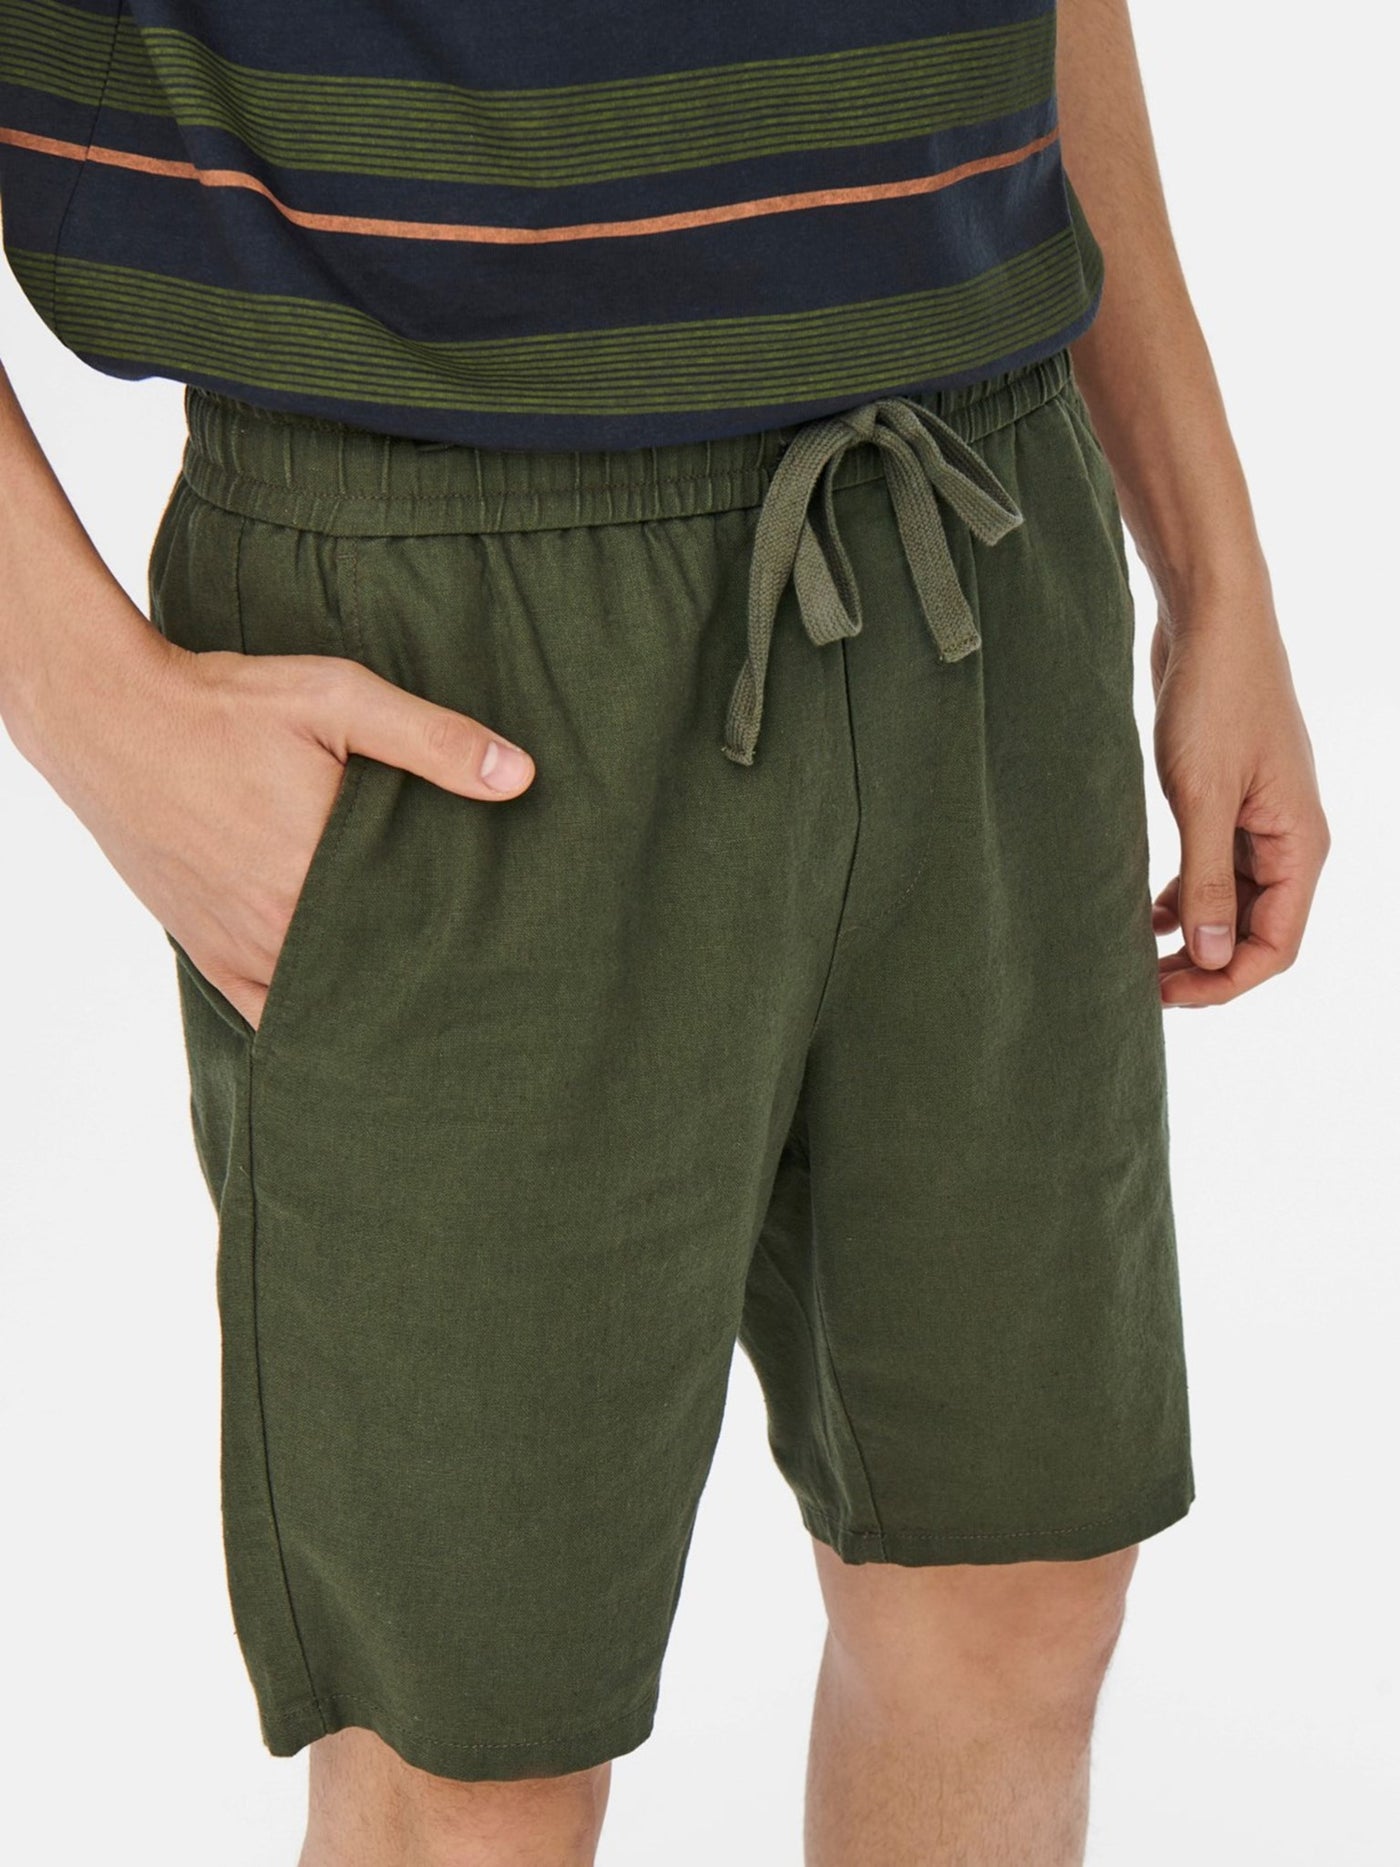 Linus Linen Shorts - Olive Night - Only & Sons - Green 2